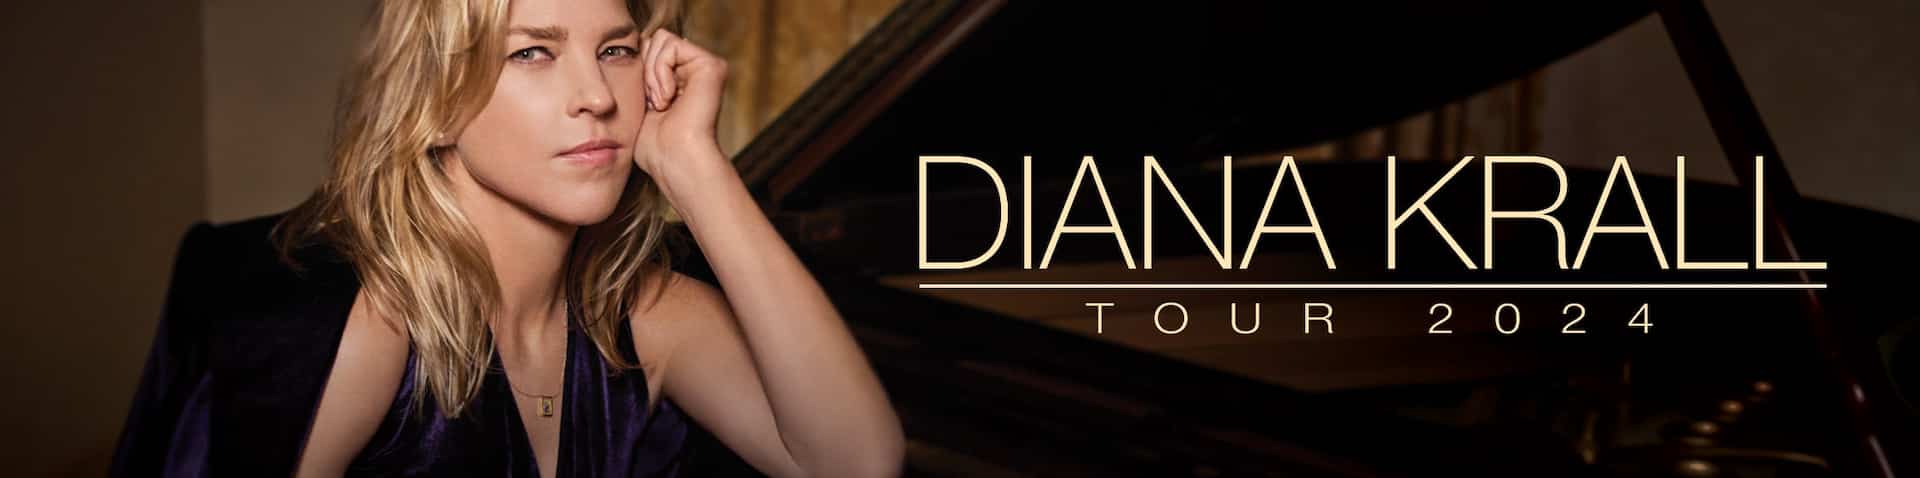 Diana Krall sitting at the piano